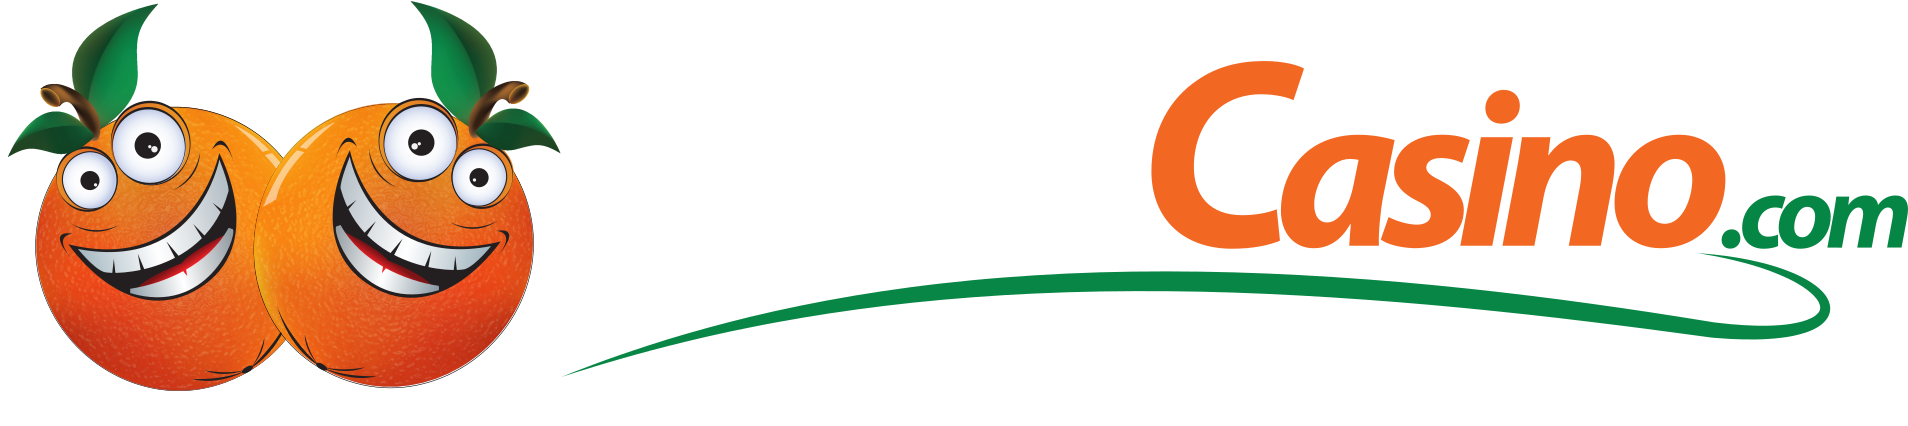 Casino as One of the Non Gamstop On-line Casino Sites with multiple free chips allowed